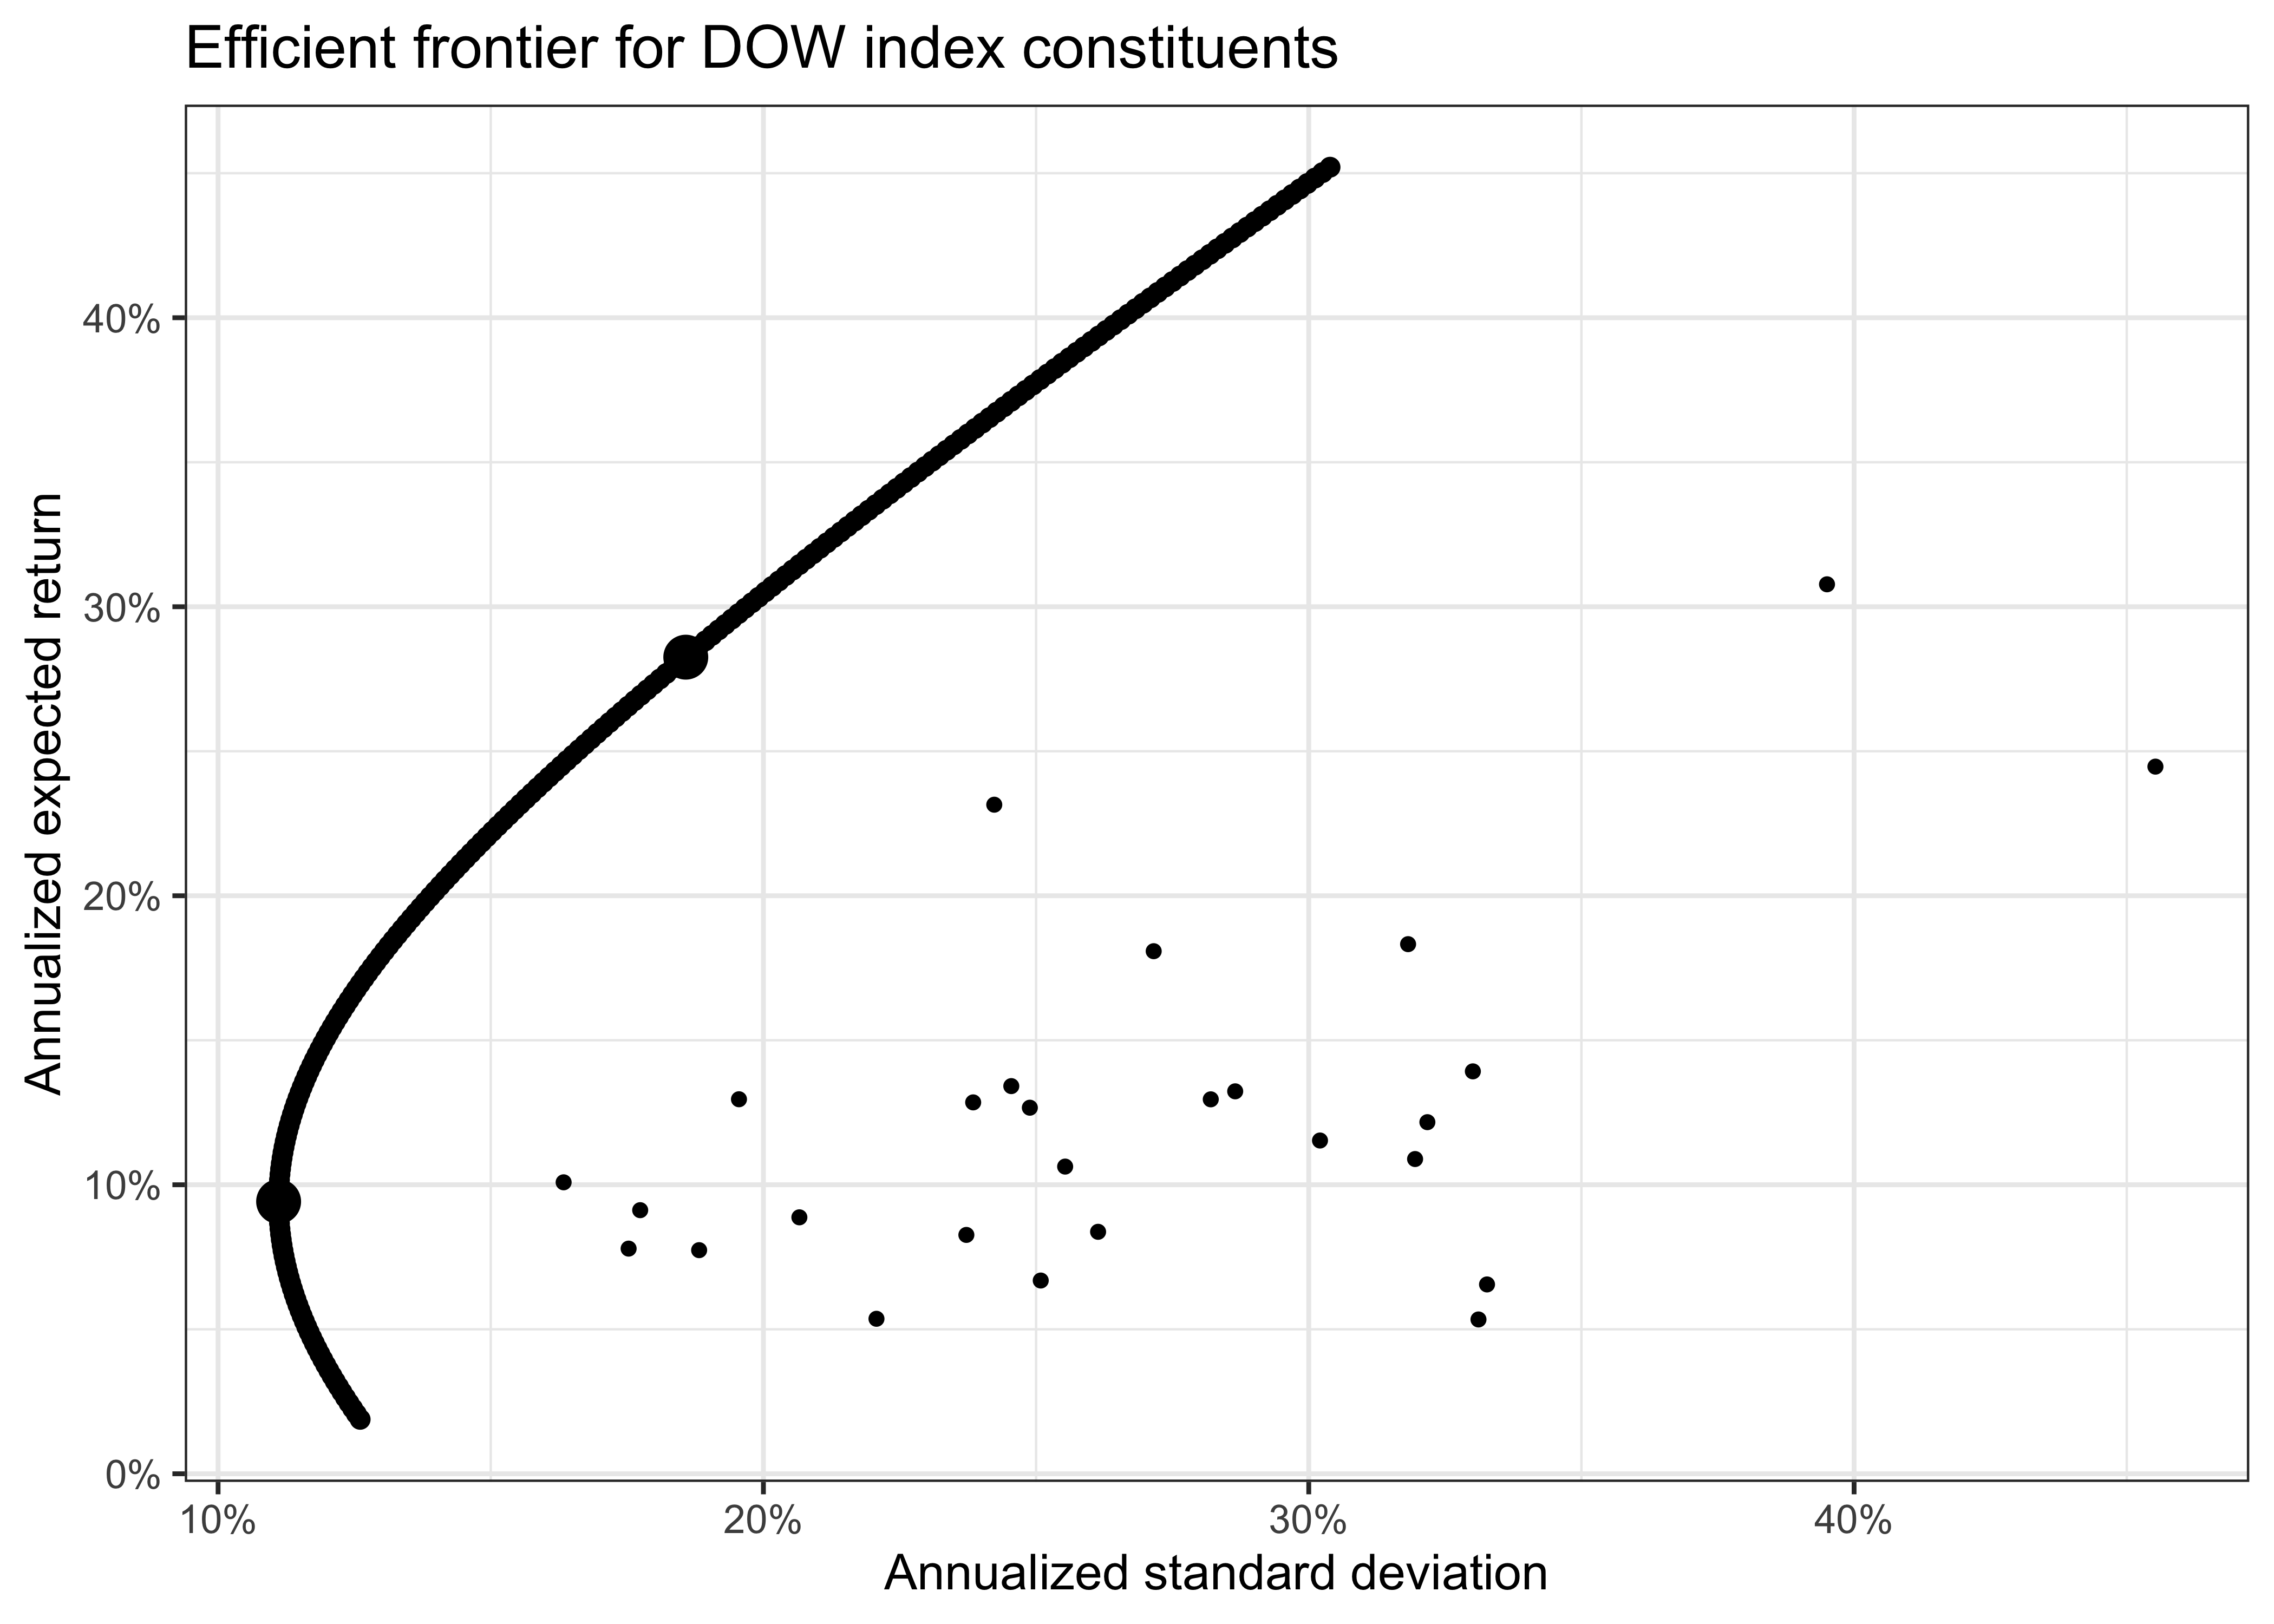 Title: Efficient frontier for DOW index constituents. The figure shows DOW index constituents in a mean-variance diagram. A hyperbola indicates the efficient frontier of portfolios that dominate the individual holdings in the sense that they deliver higher expected returns for the same level of volatility.